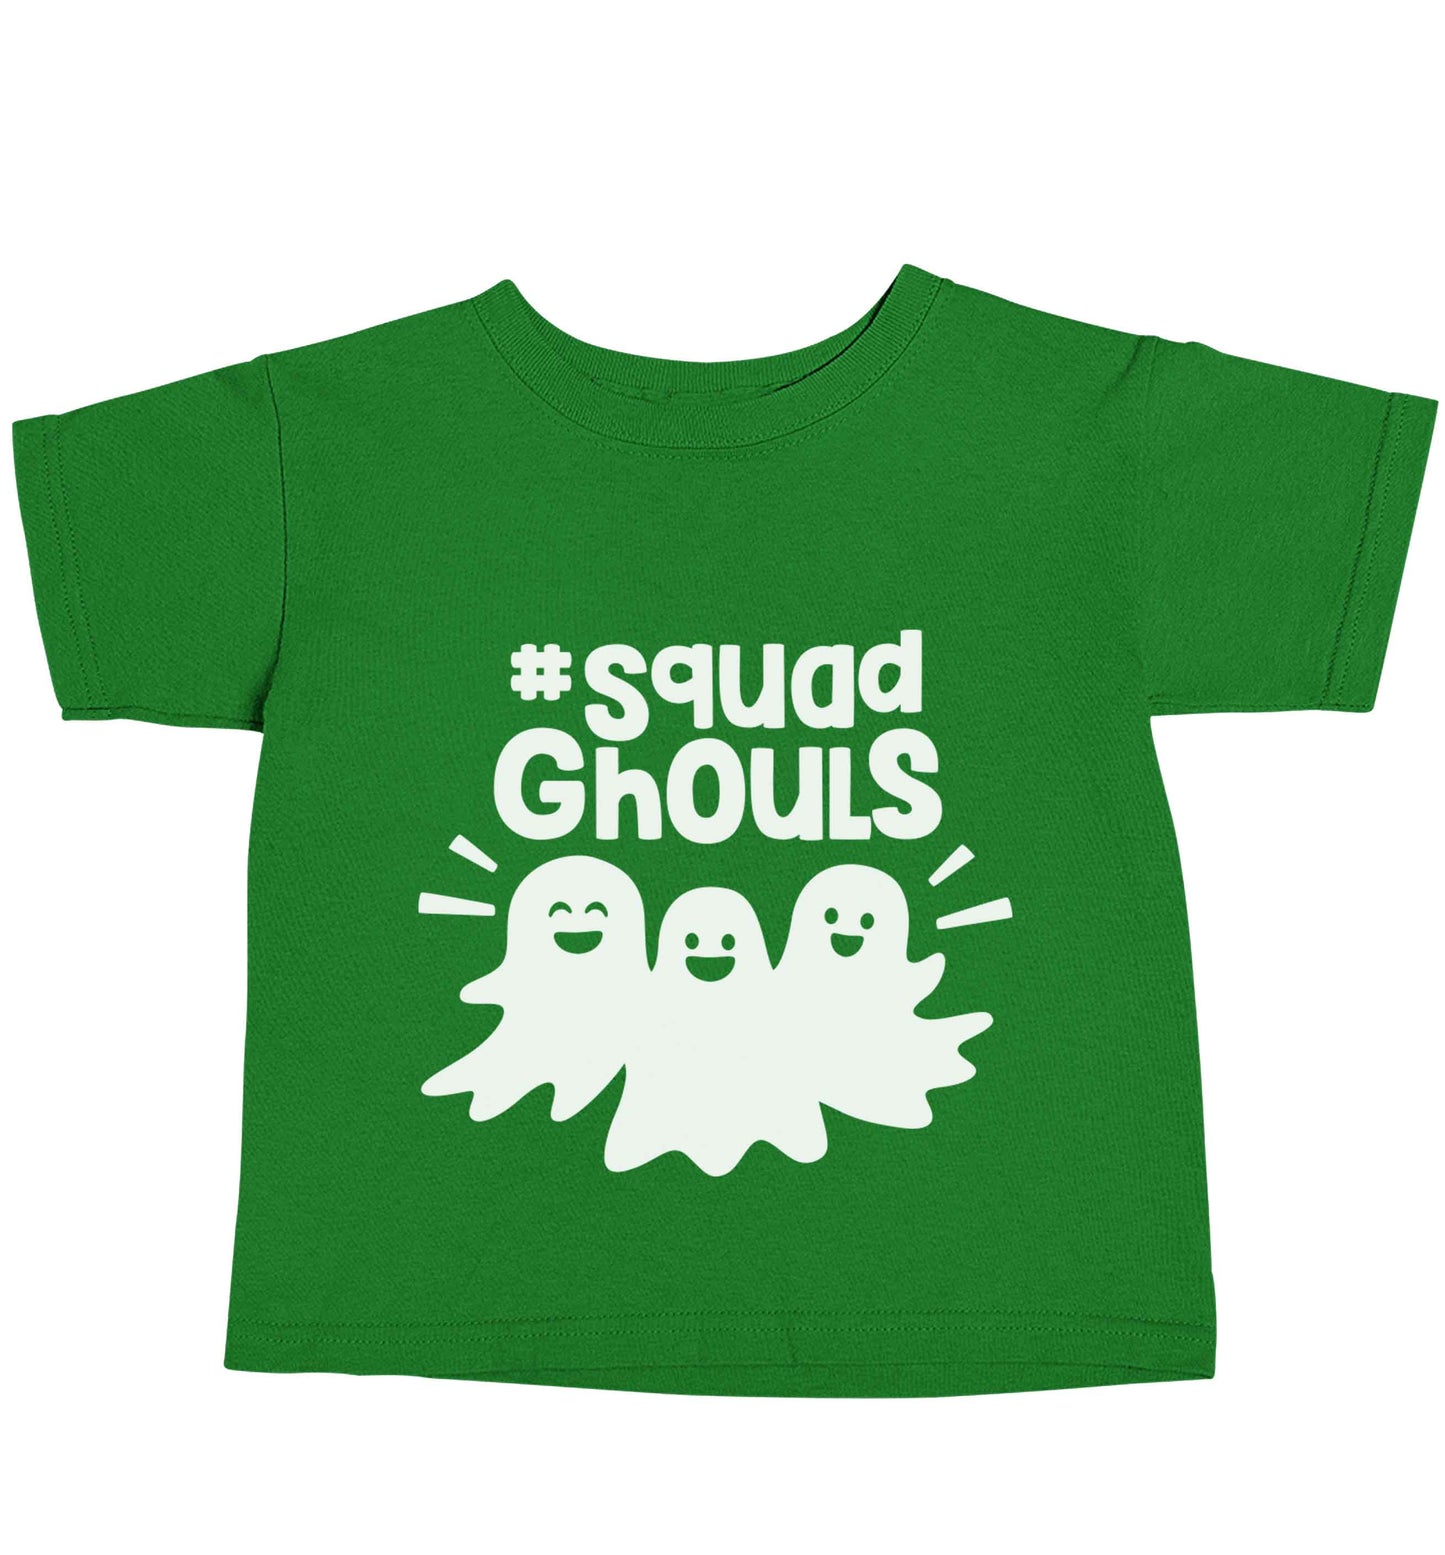 Squad ghouls Kit green baby toddler Tshirt 2 Years